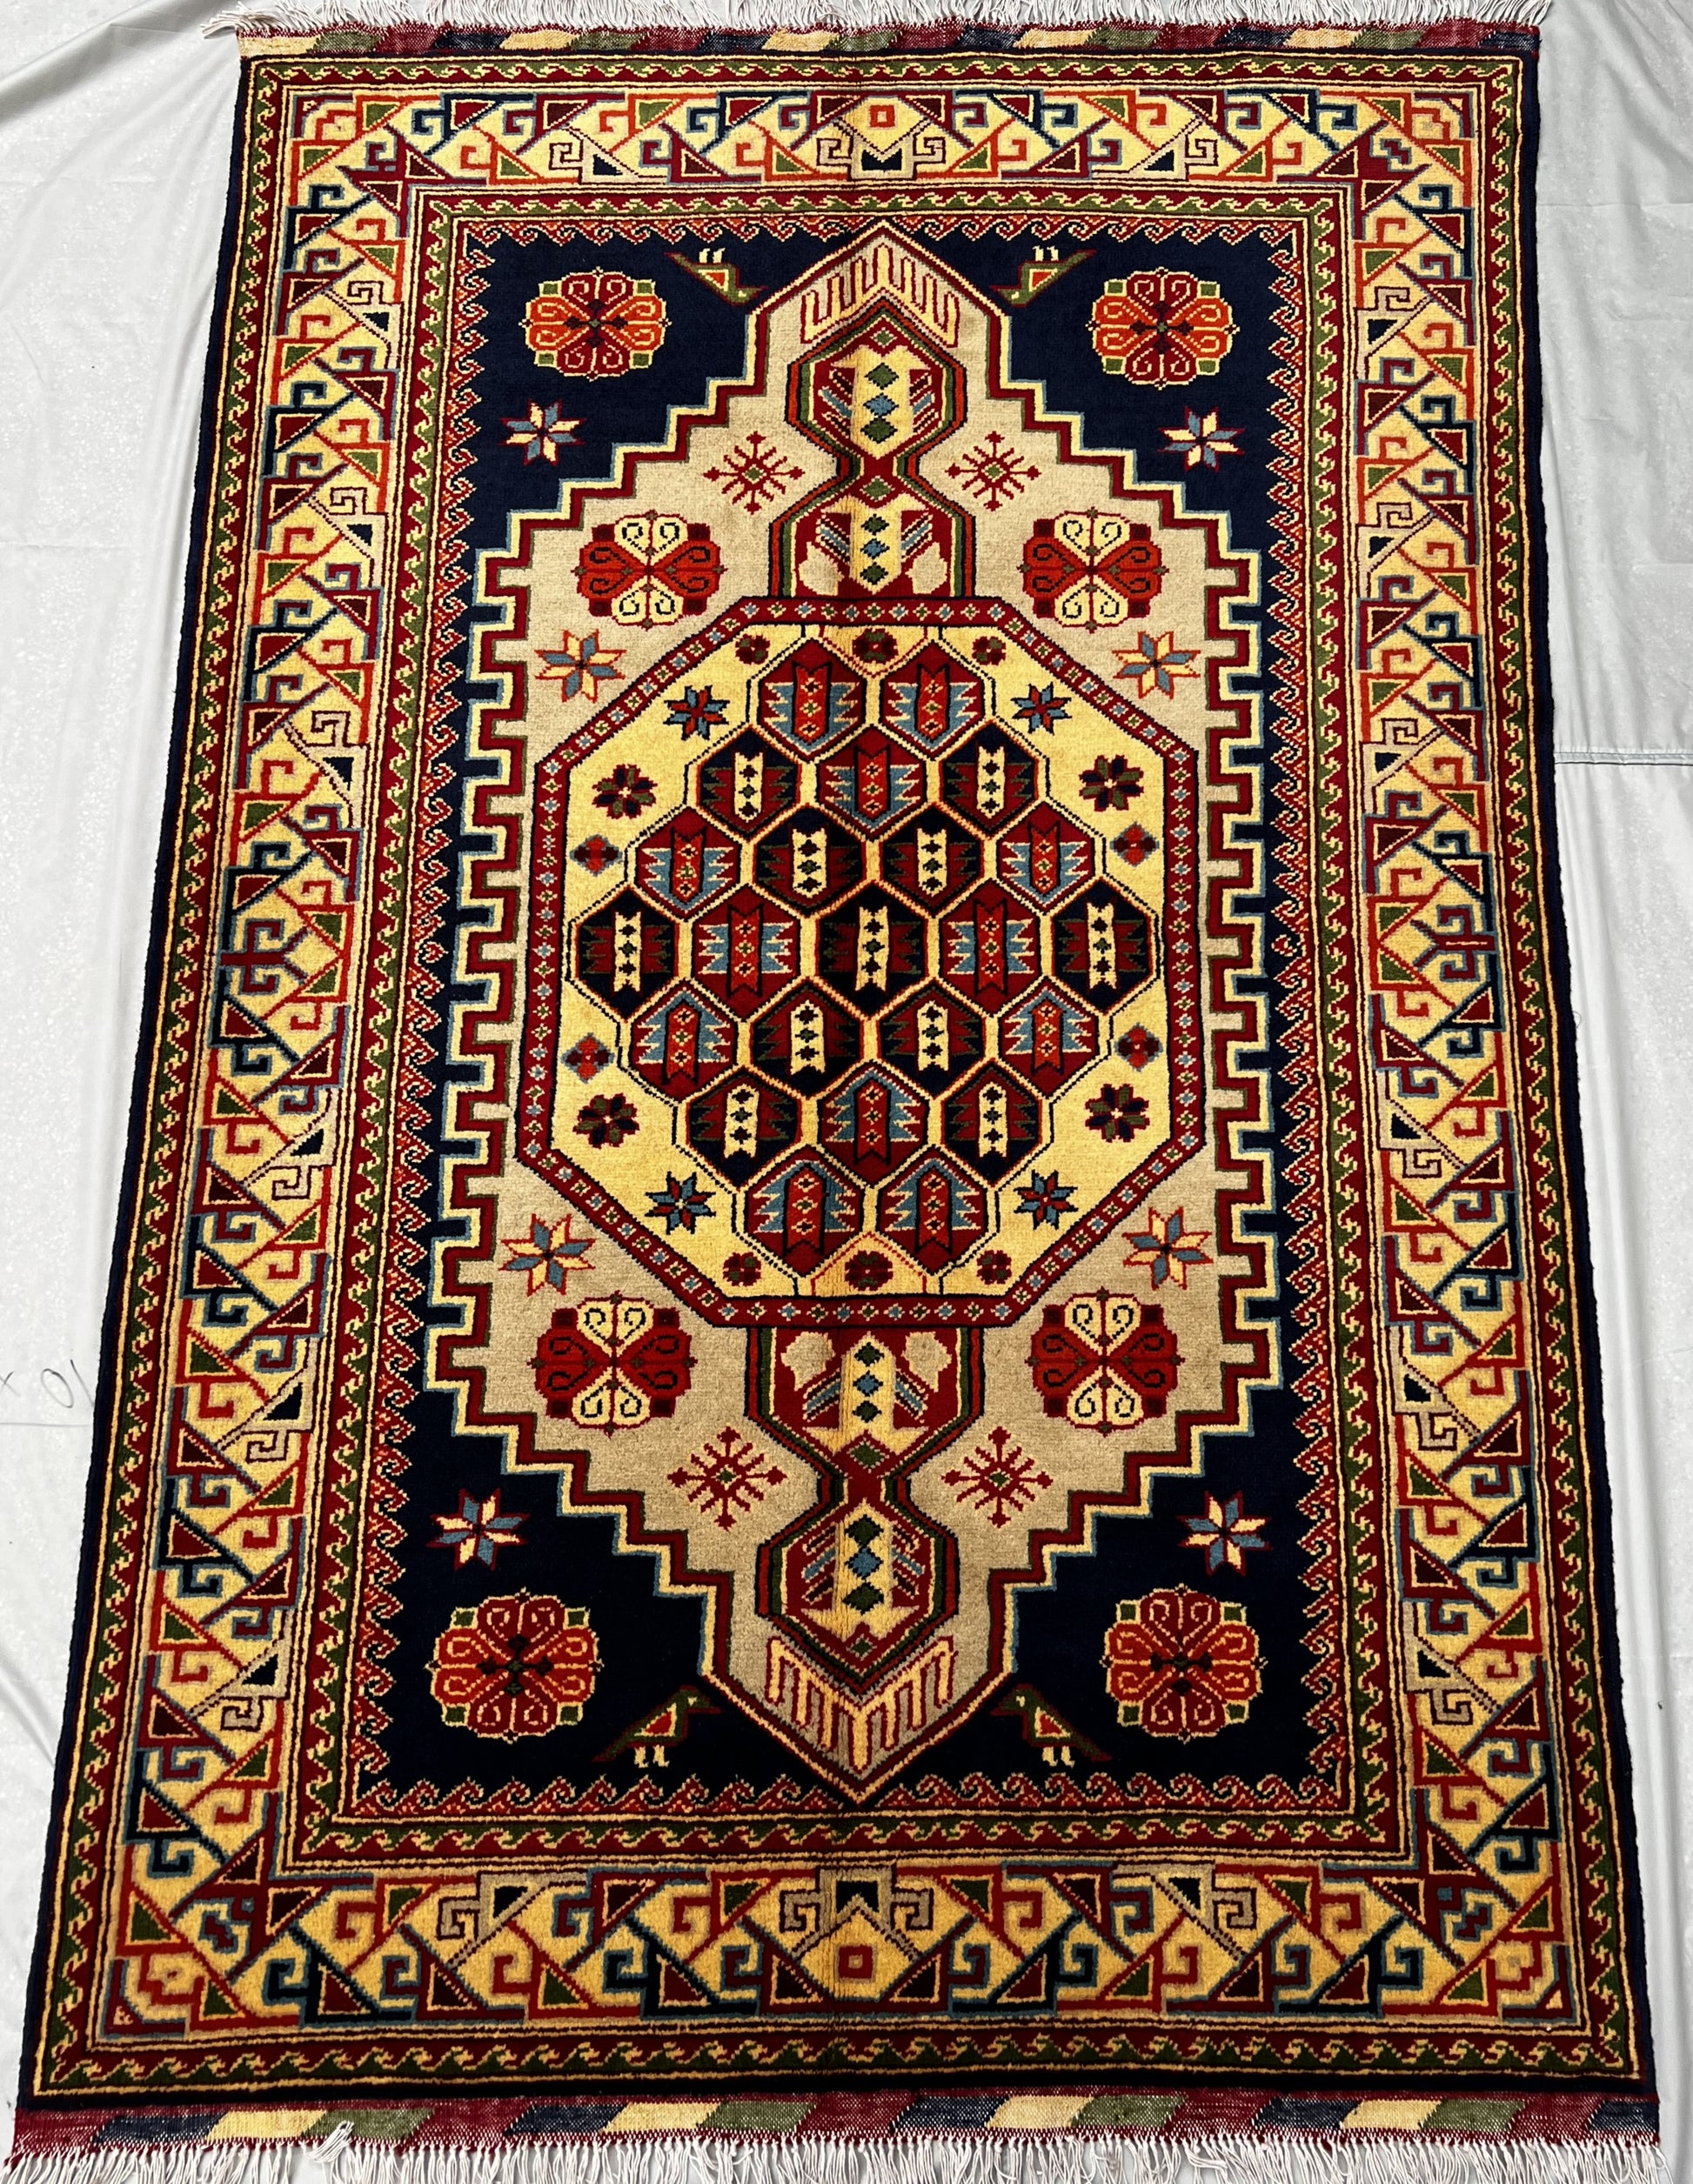 Afghan Hand Knotted/ Knitted Living Room/Dining Room Chob Rang Area Rug 4.6ftx3.2ft (CH-M-4X3-Y/DB-N) (Mazar-e-sharif) - Kabul Rugs